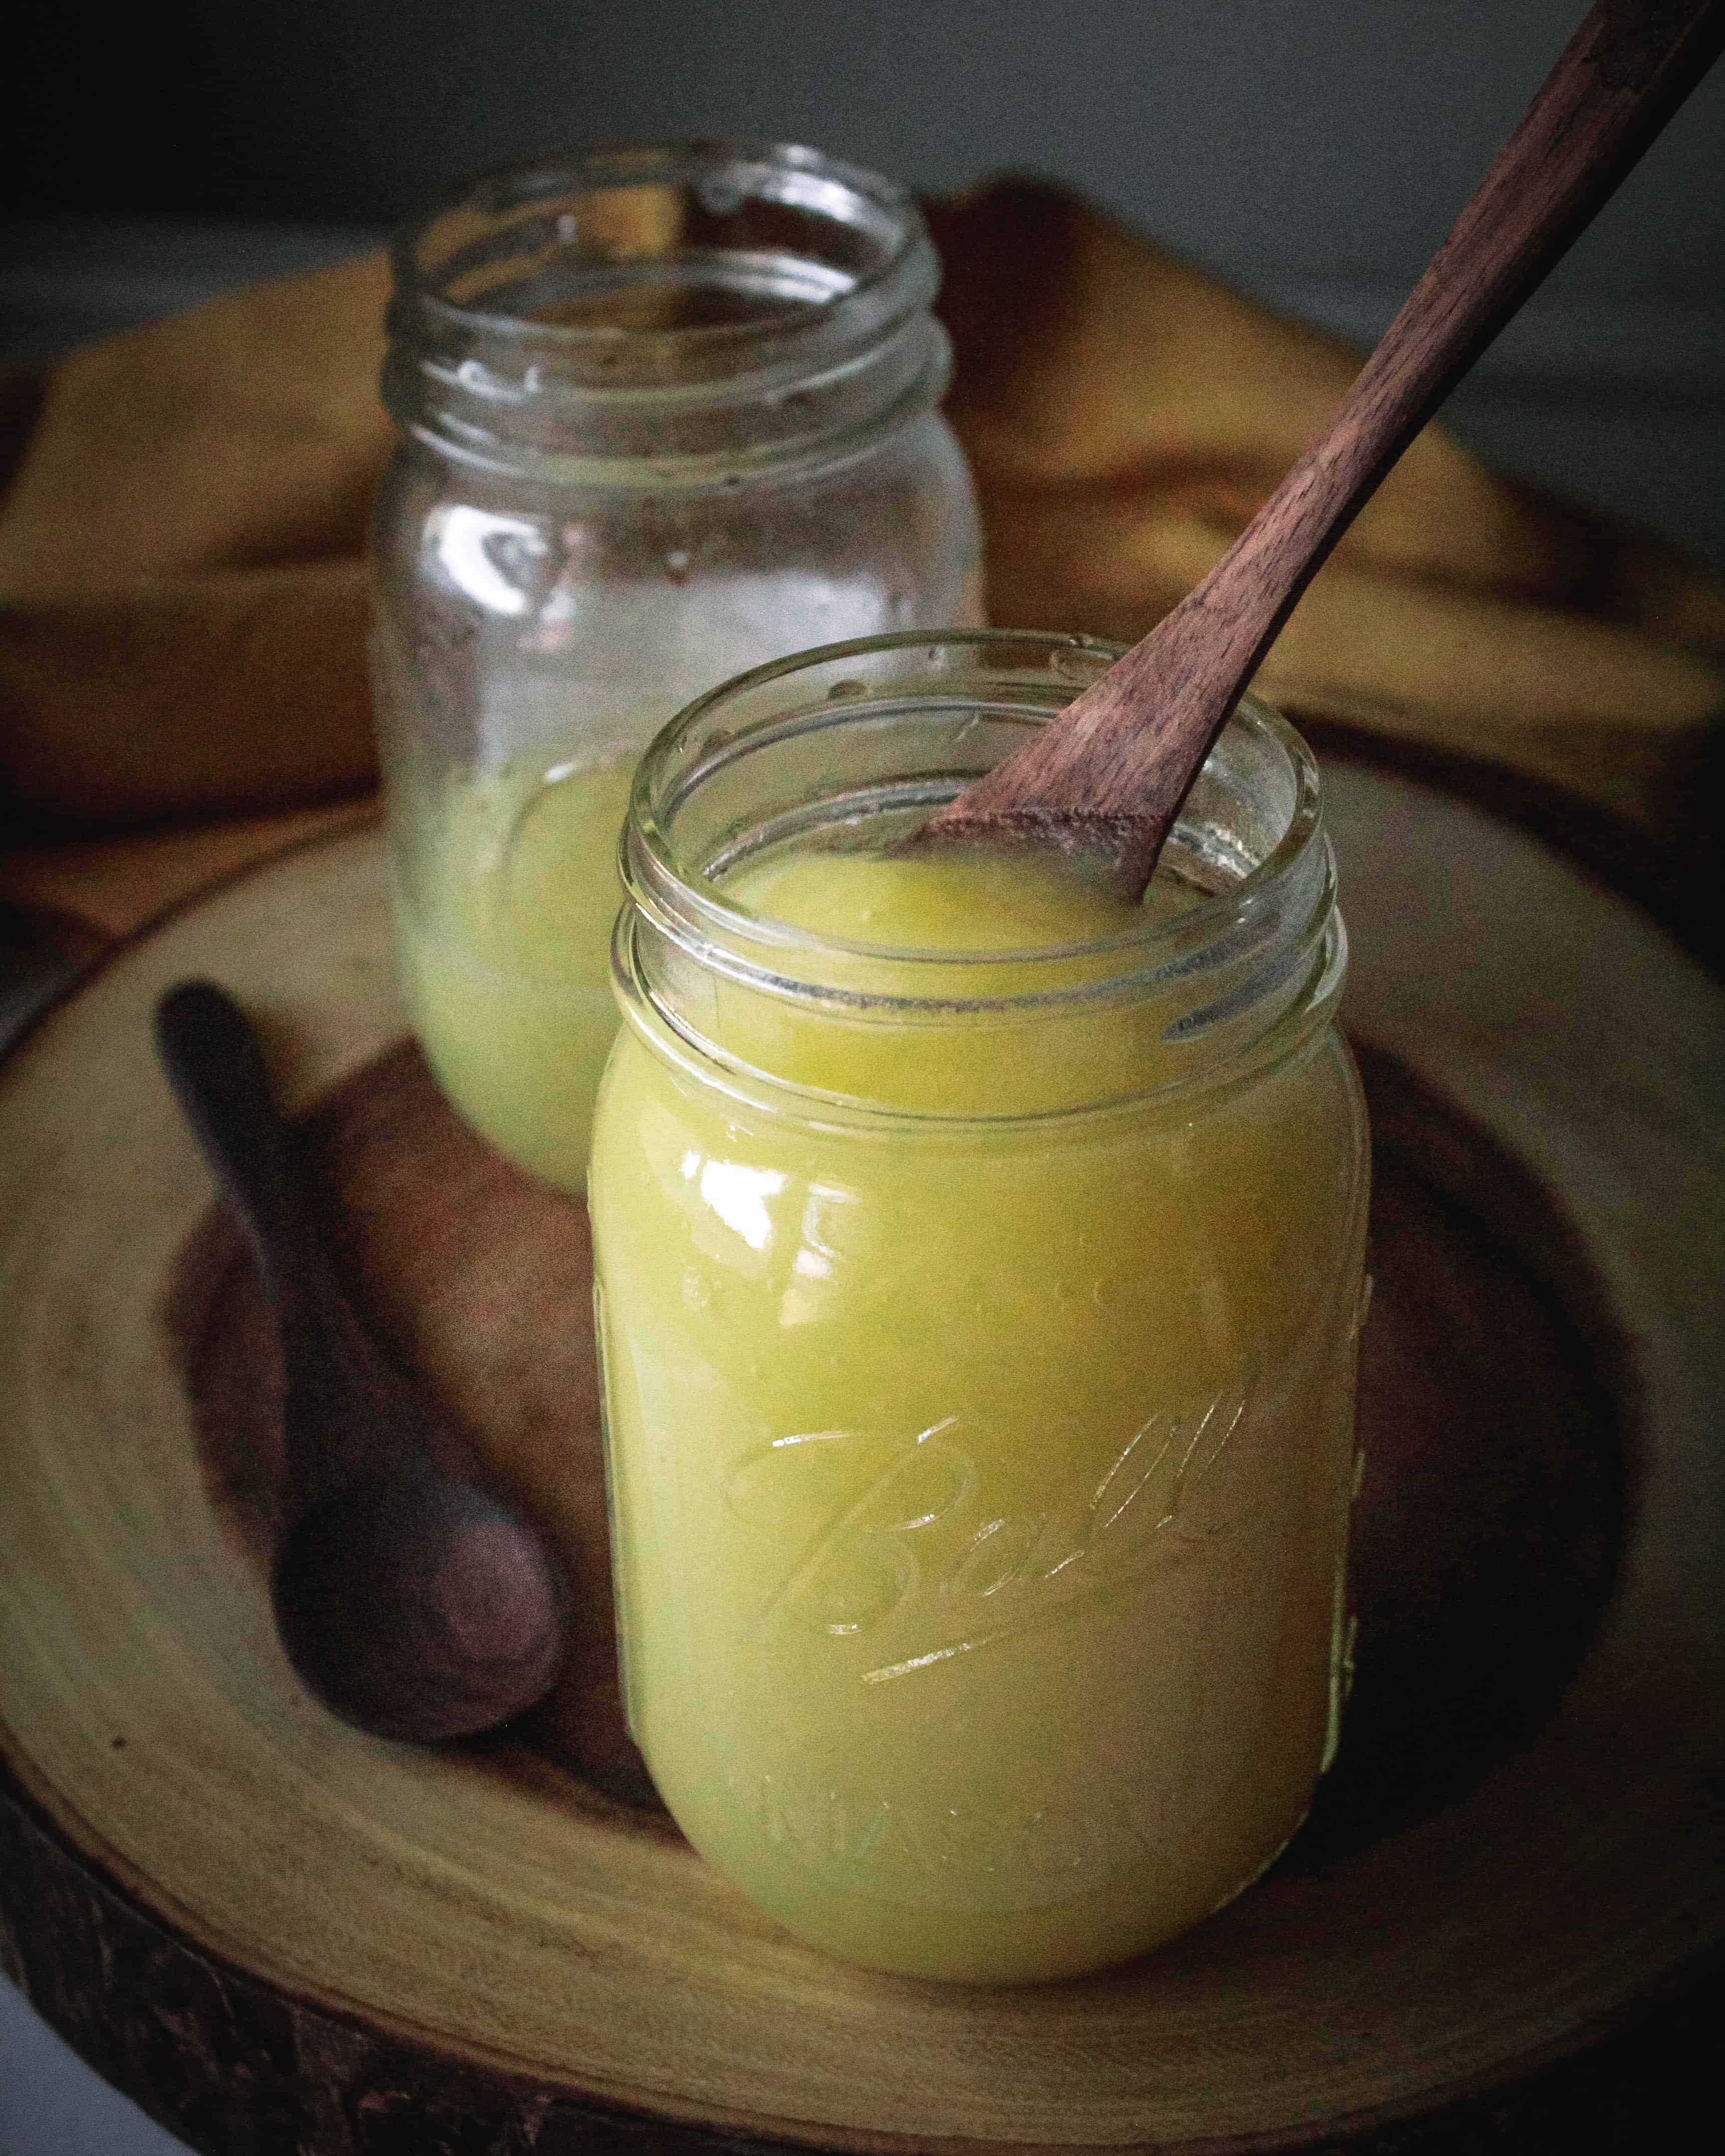 How to Make Applesauce from Scratch